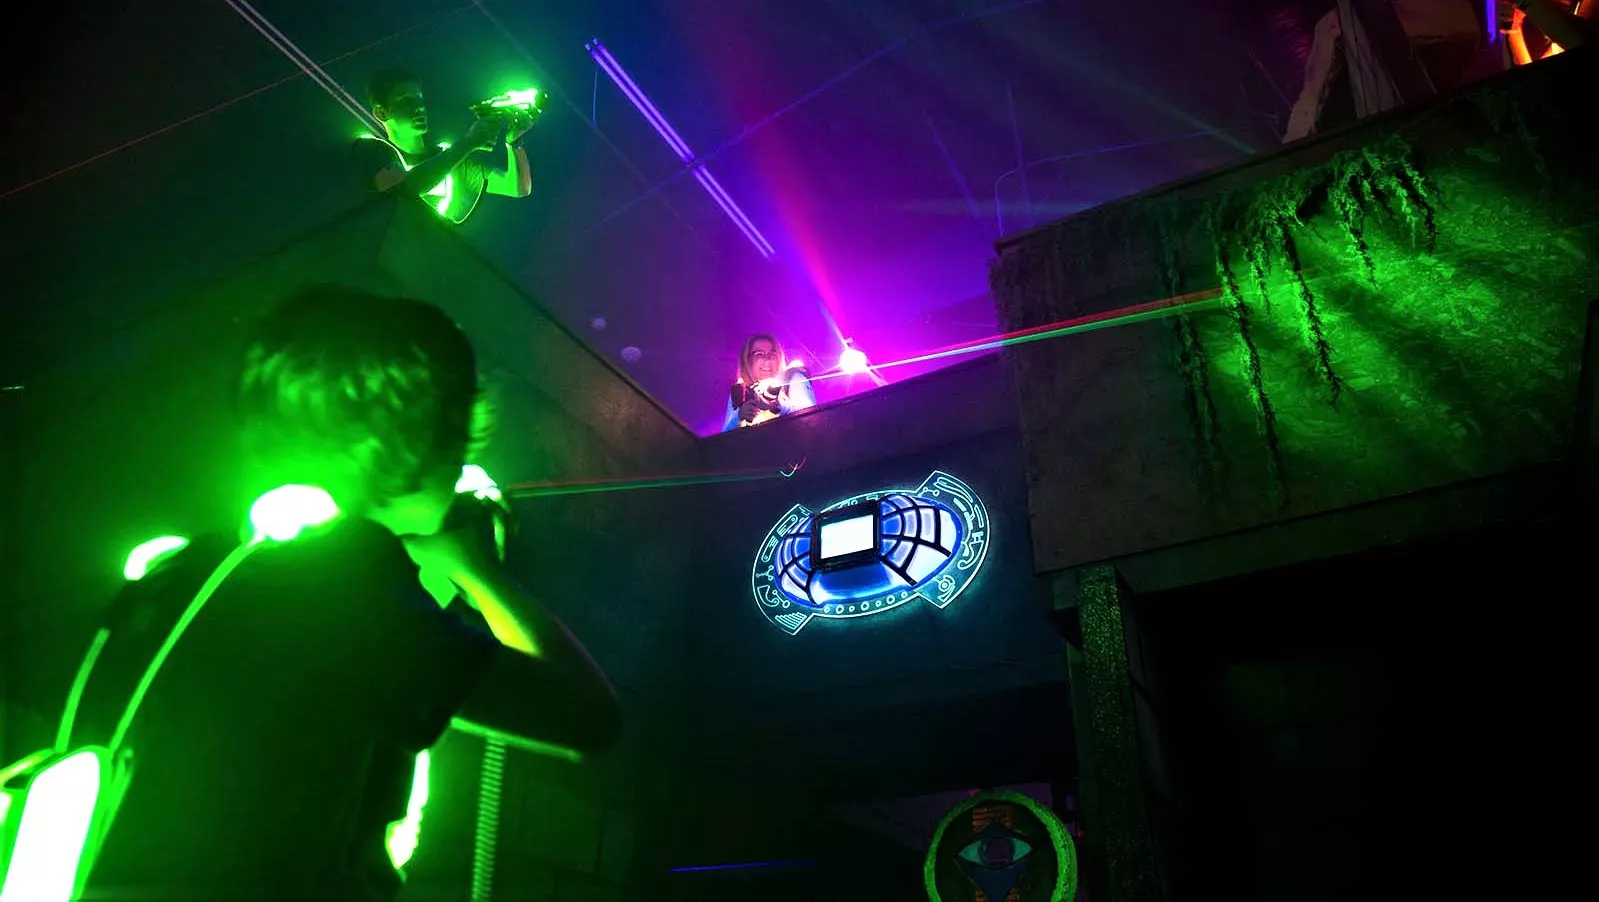 Laserforce Wellington in New Zealand, Australia and Oceania | Laser Tag - Rated 3.7